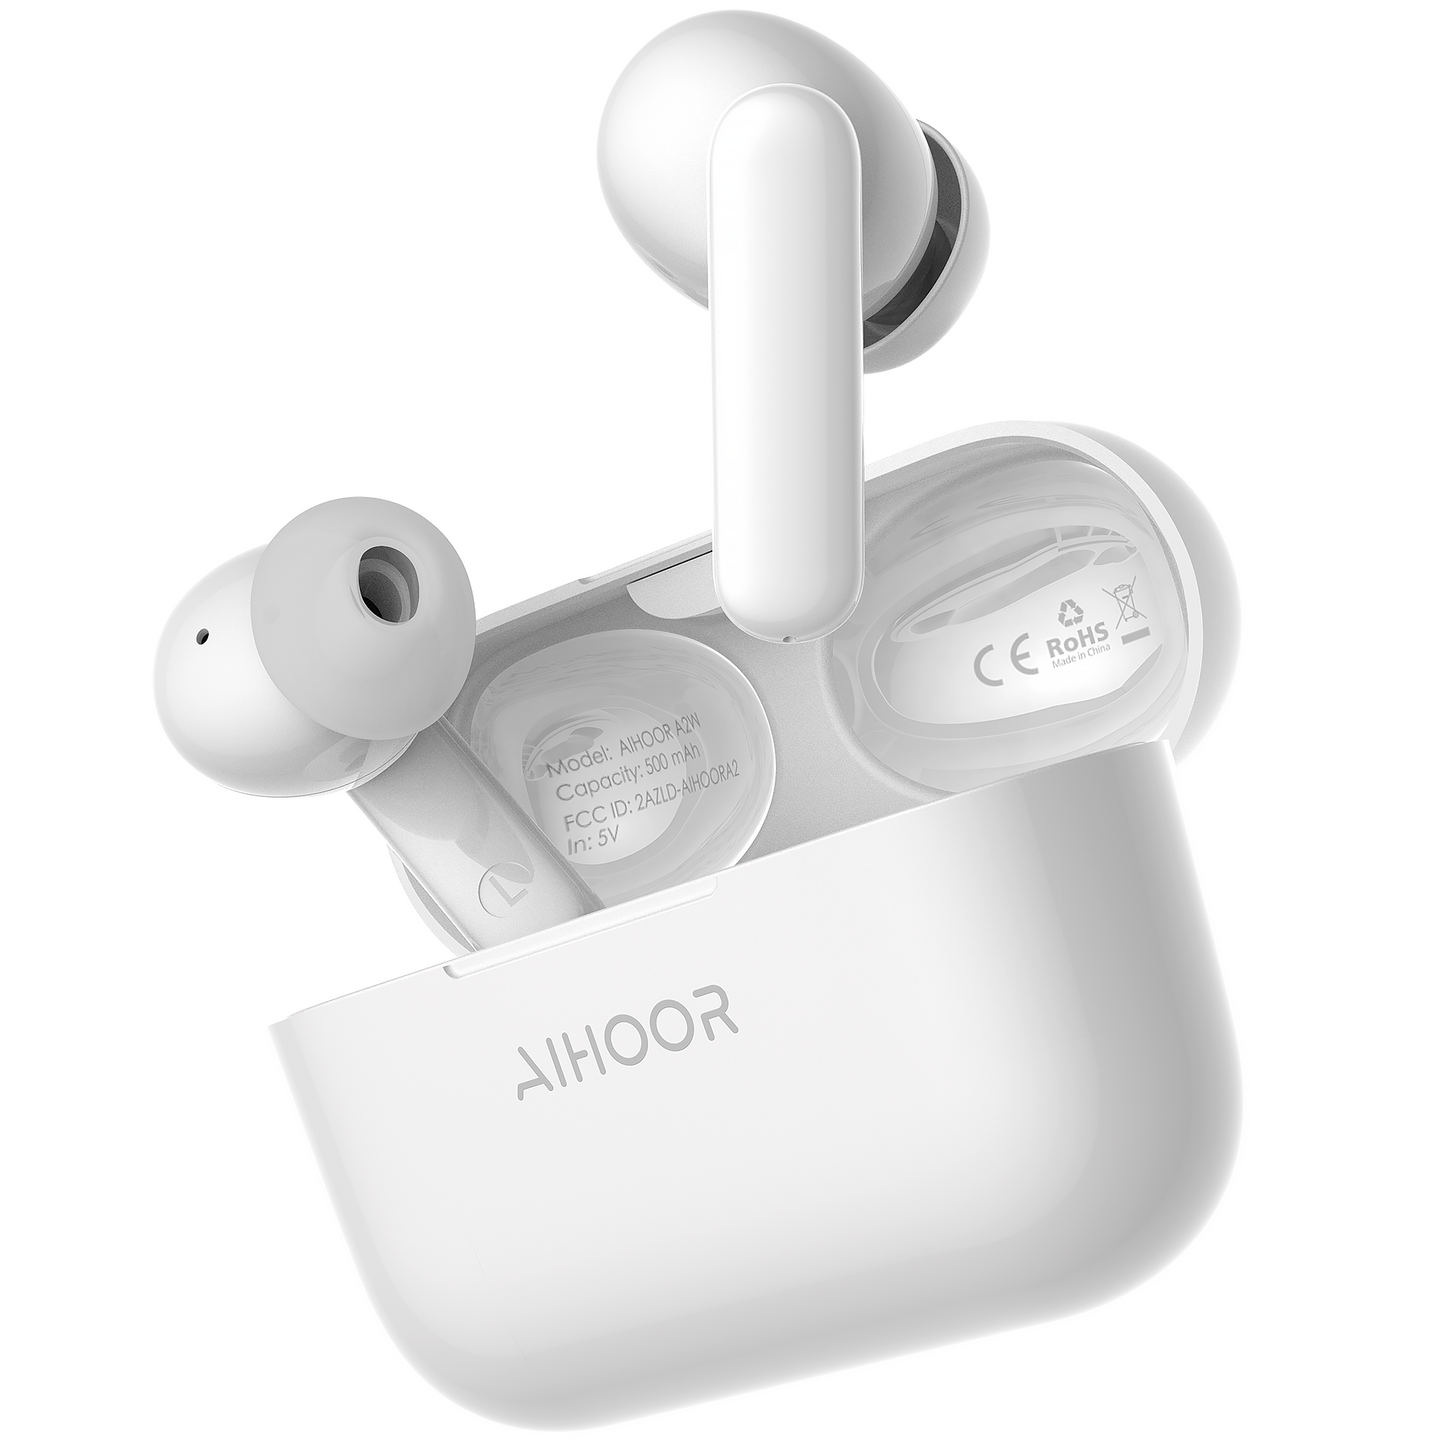 AIHOOR A2 - Wireless In-Ear Earbuds Replacement Kit 【Refurbished】【Purchase upon Inquiry】【Not Sold Separately】